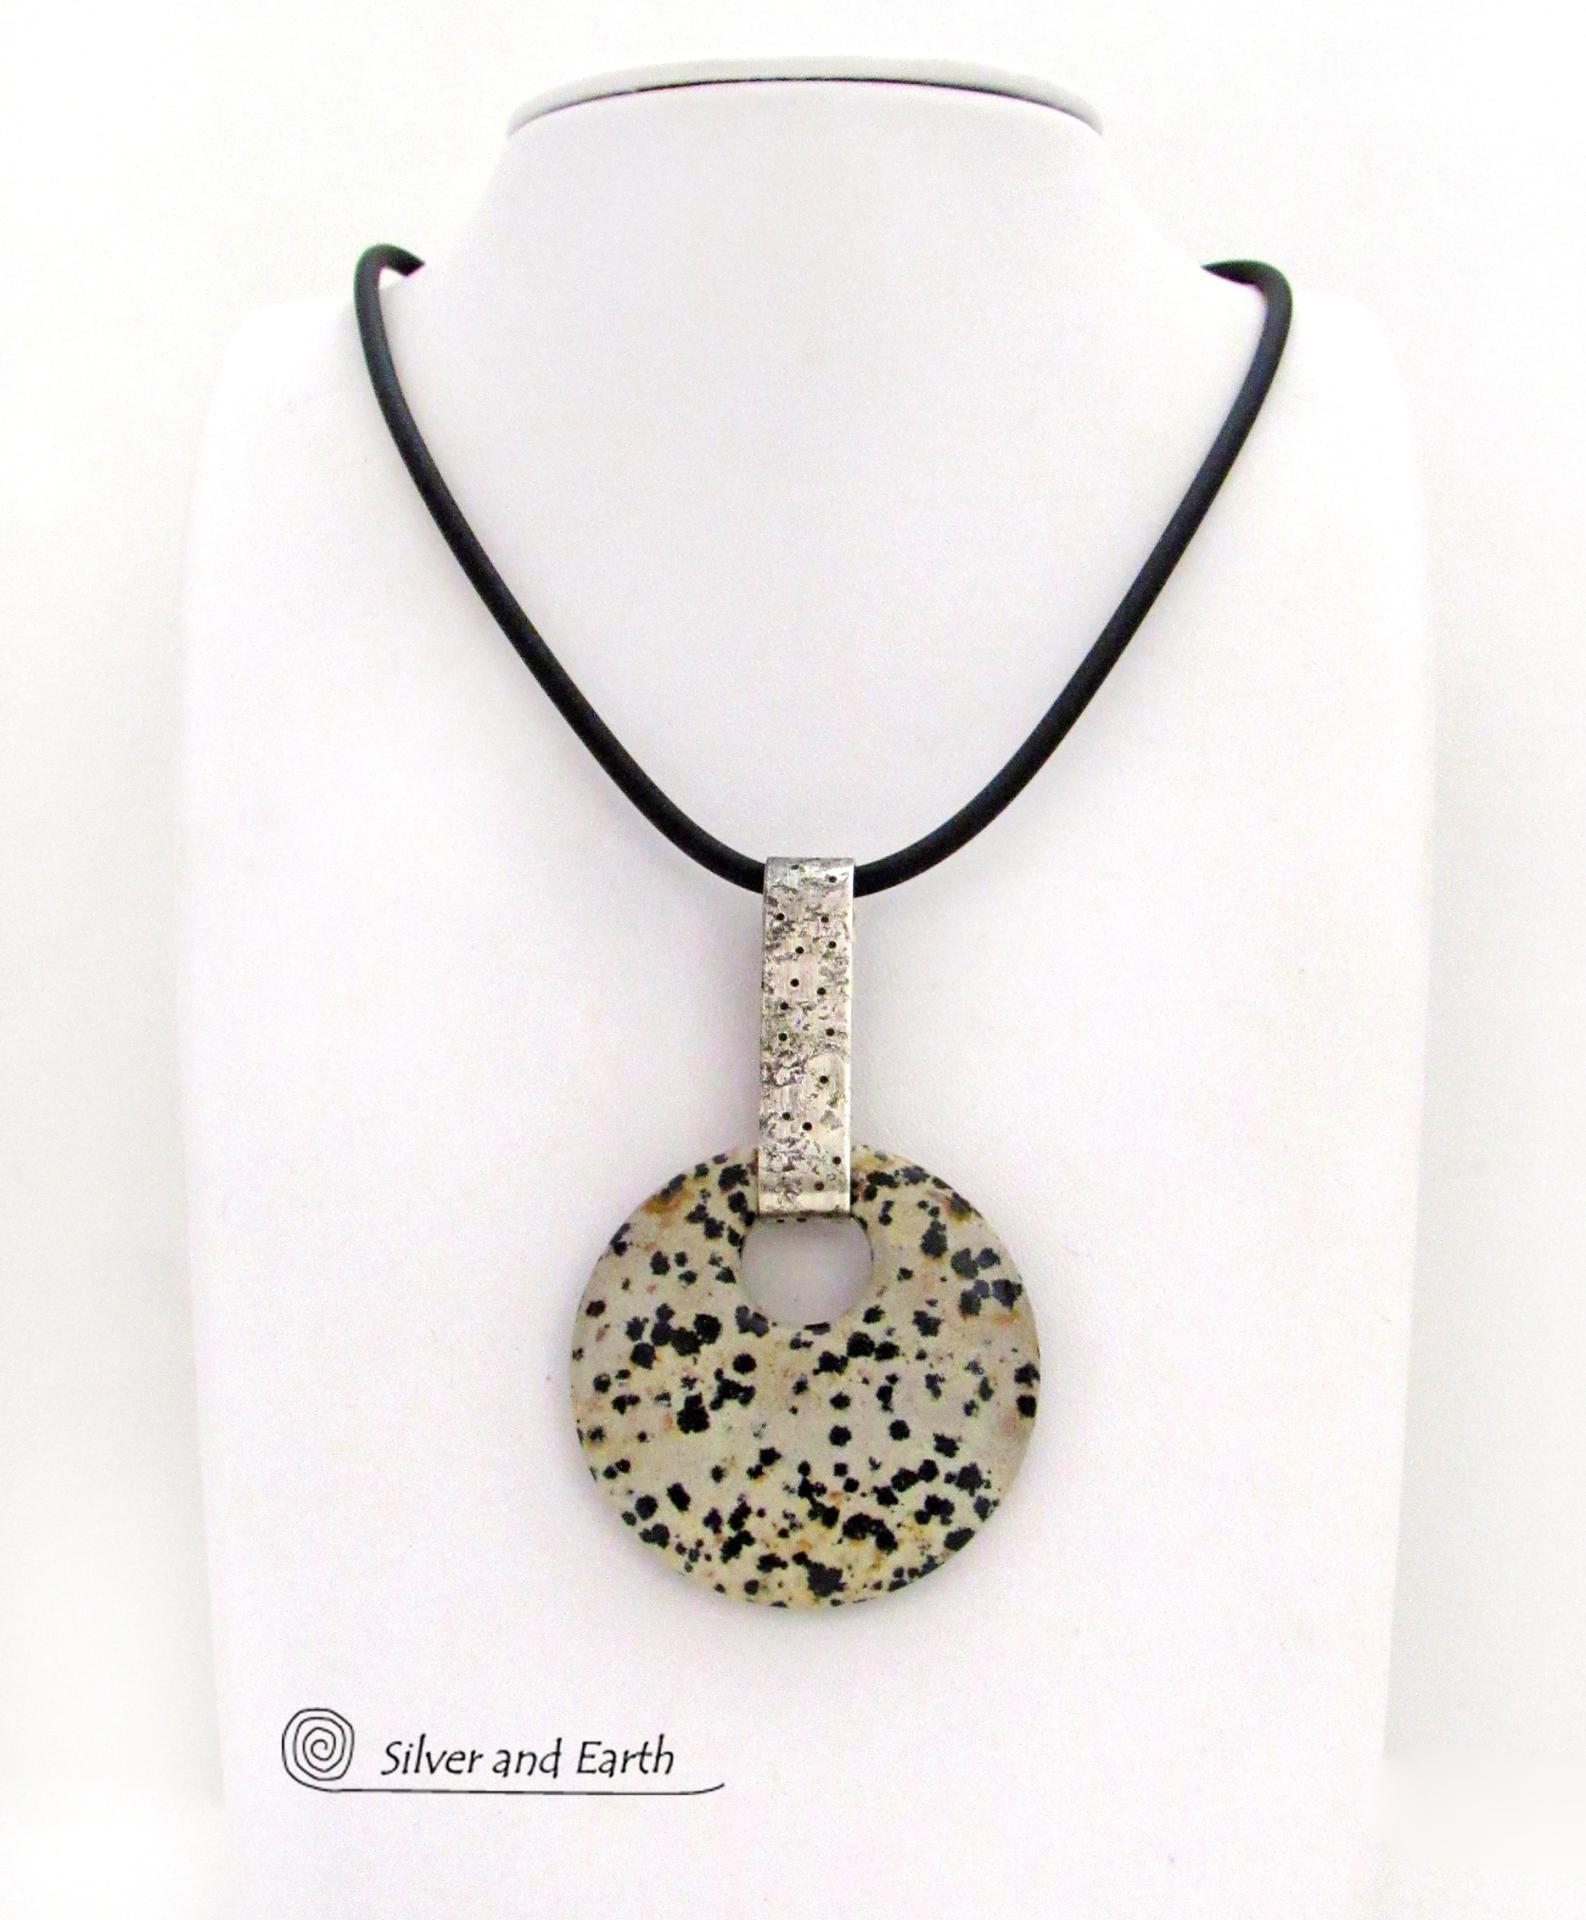 Dalmatian Jasper Sterling Silver Pendant Necklace - Earthy Natural Stone Jewelry for Men or Women